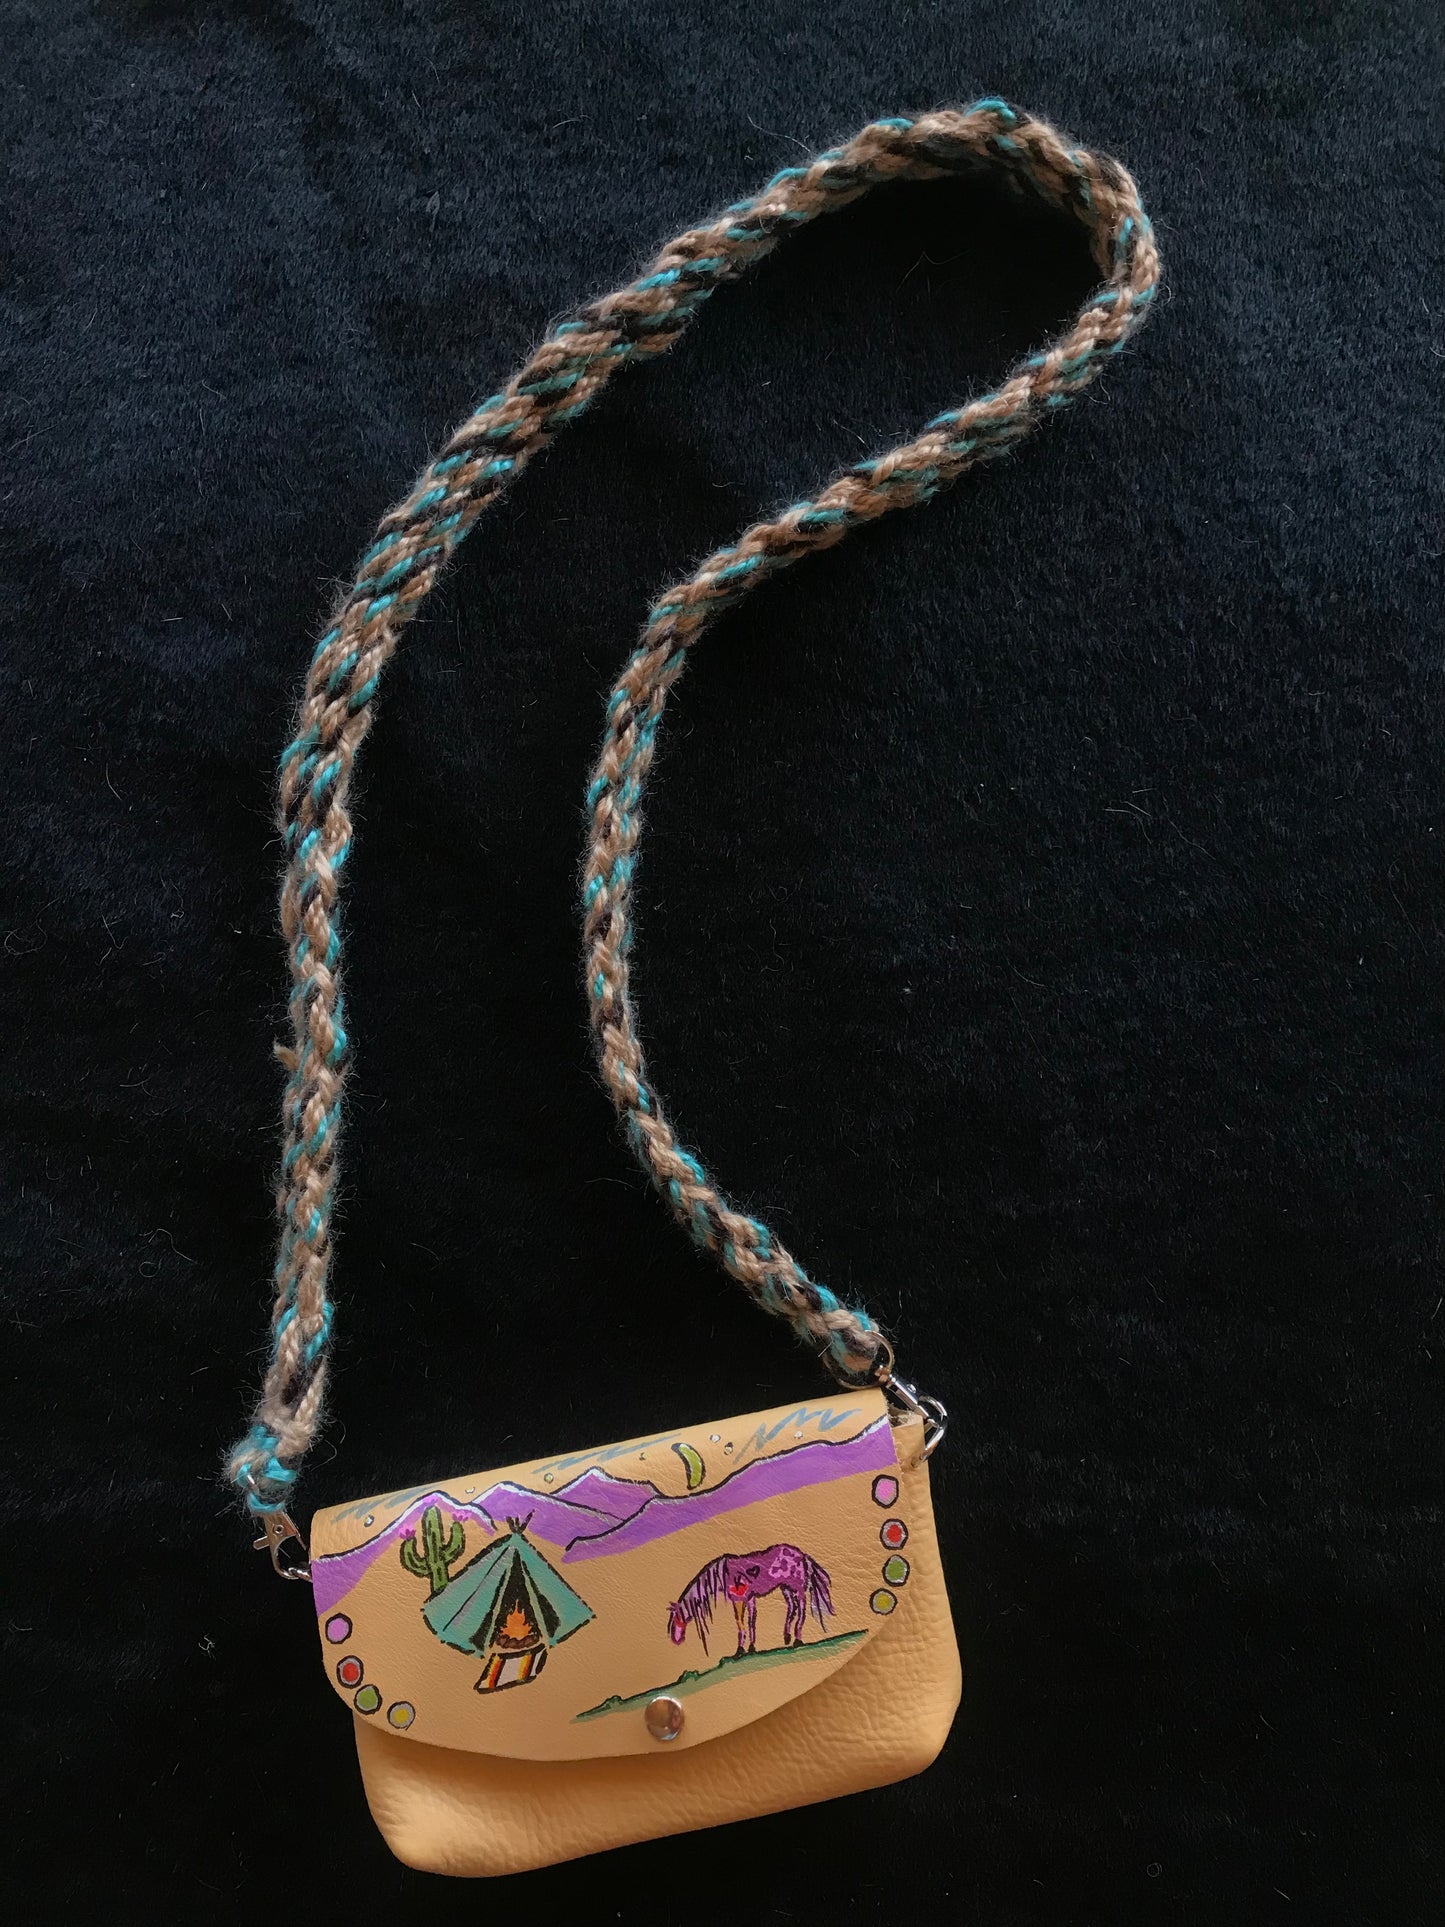 Tipi and Painted Pony Purse